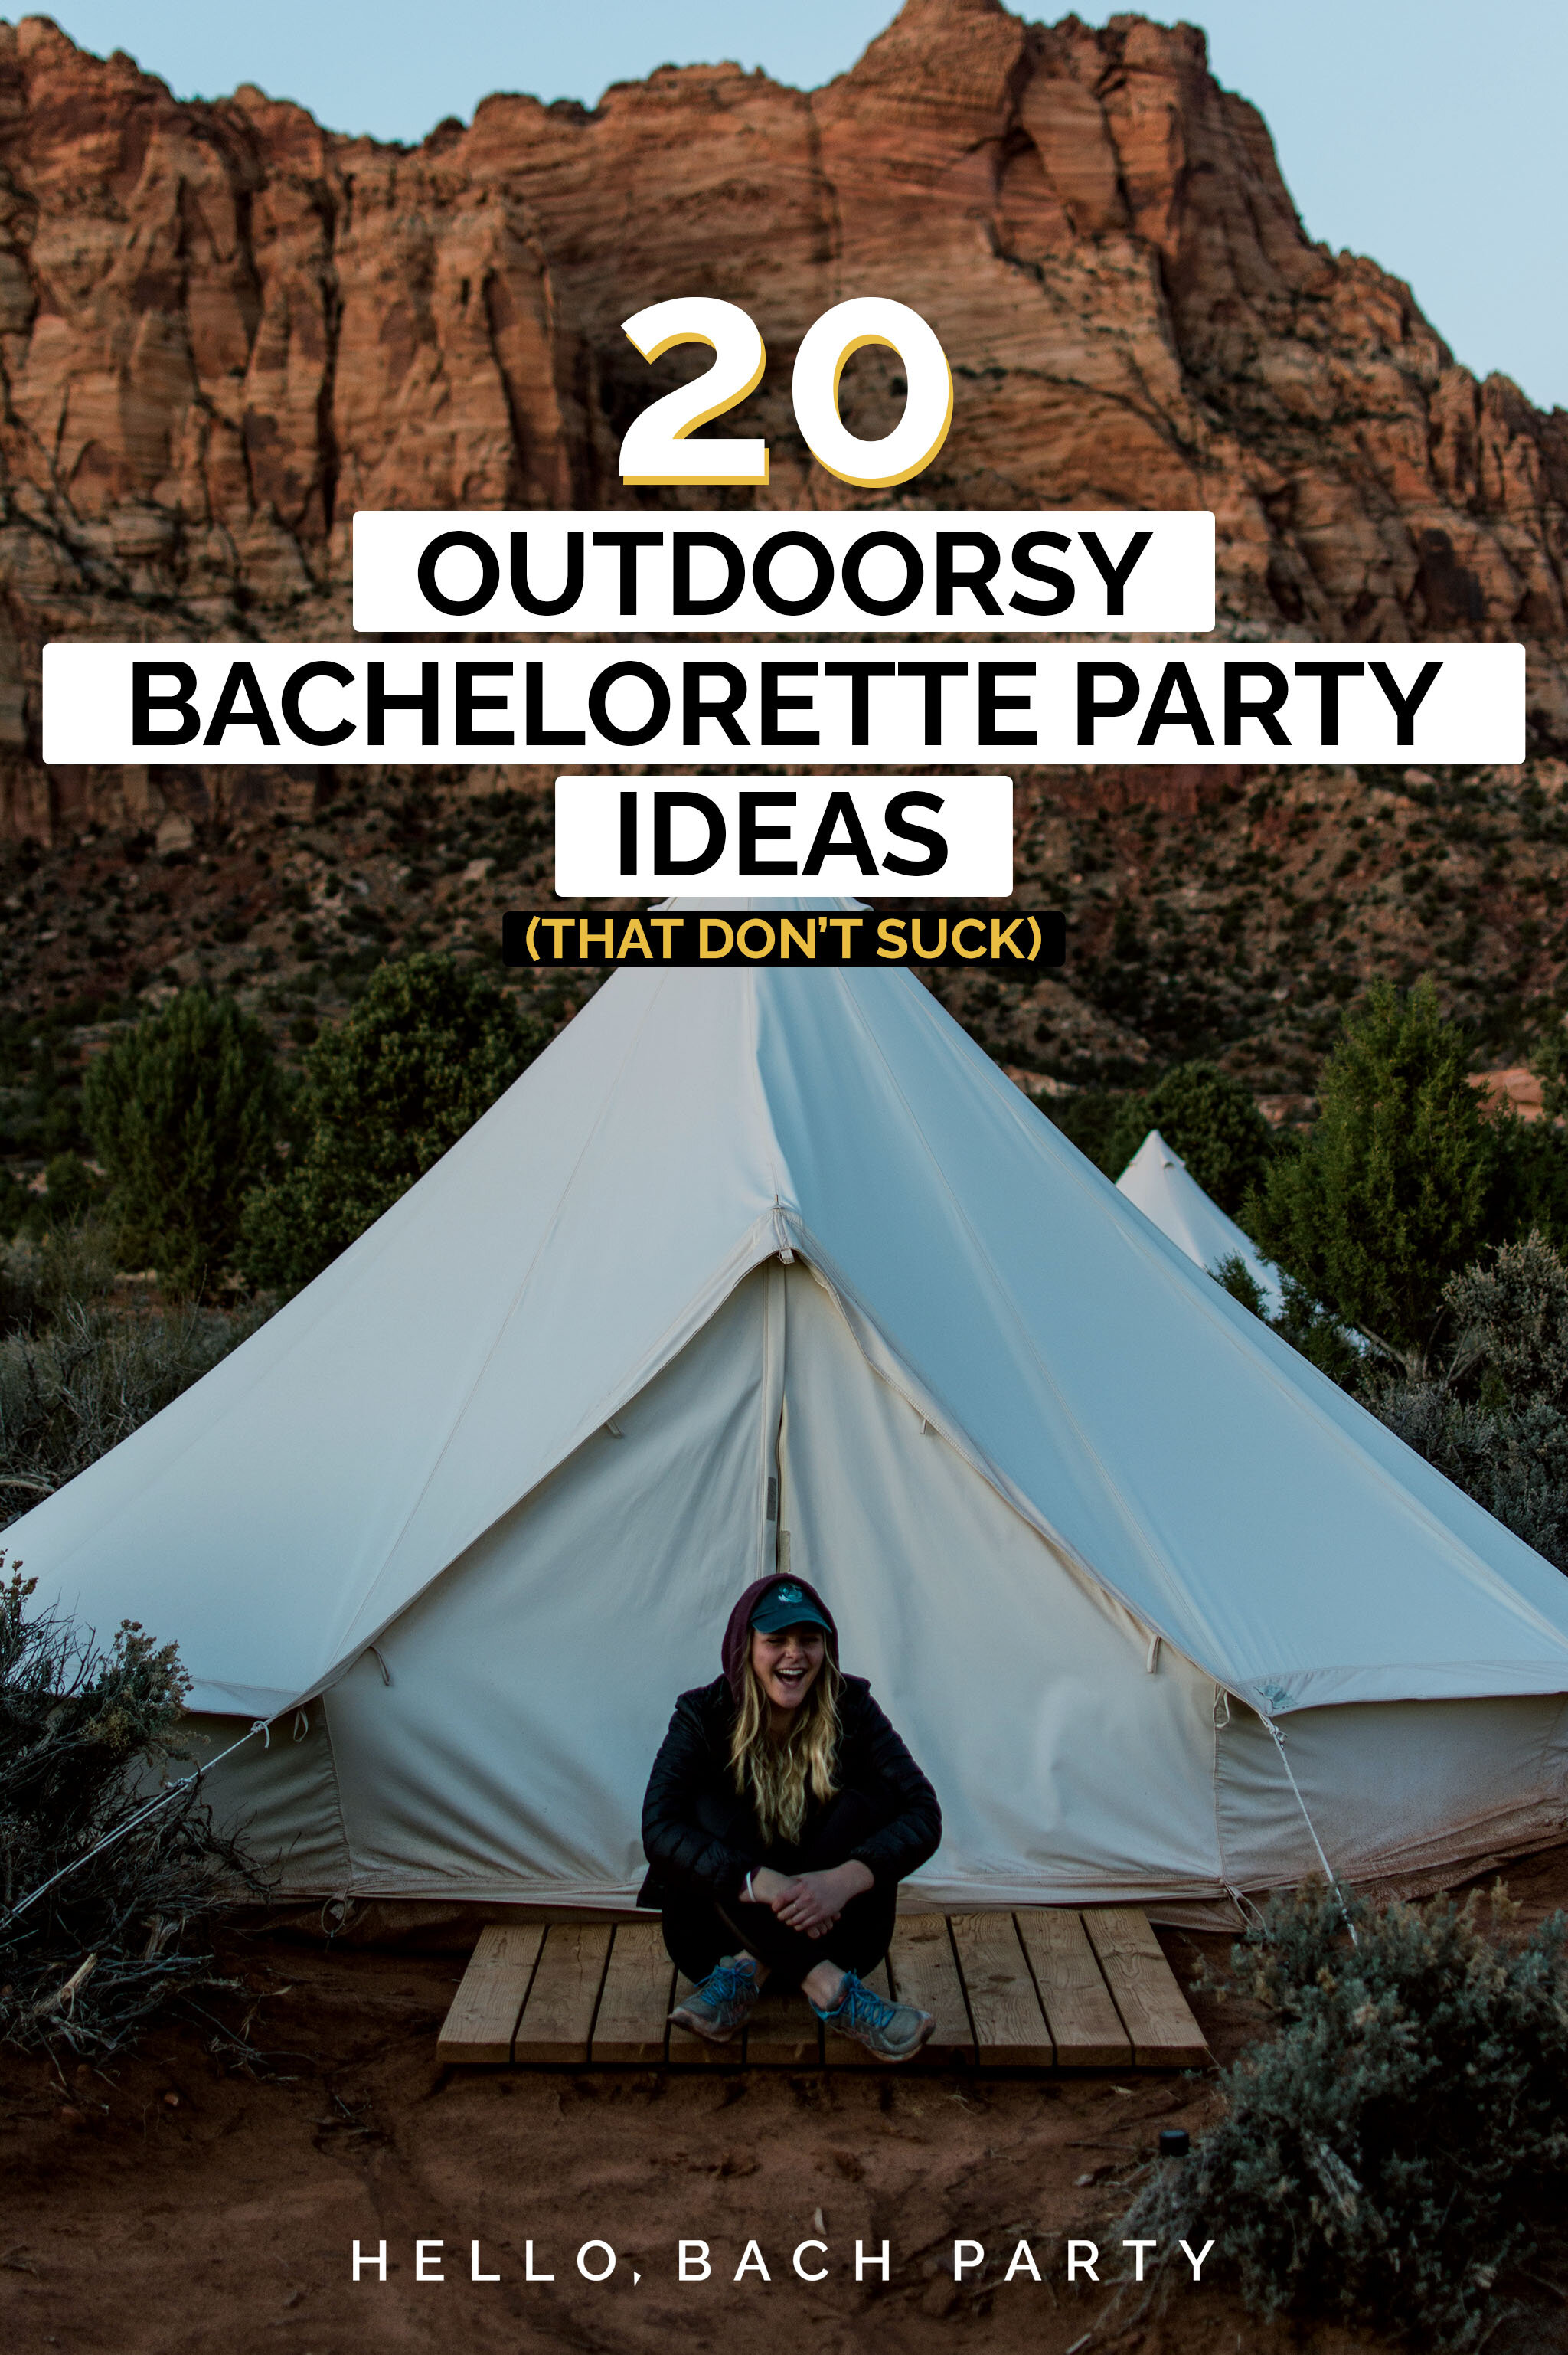 Bachelorette Party Ideas for the Outdoorsy Bride - The Complete Adventure  Guide